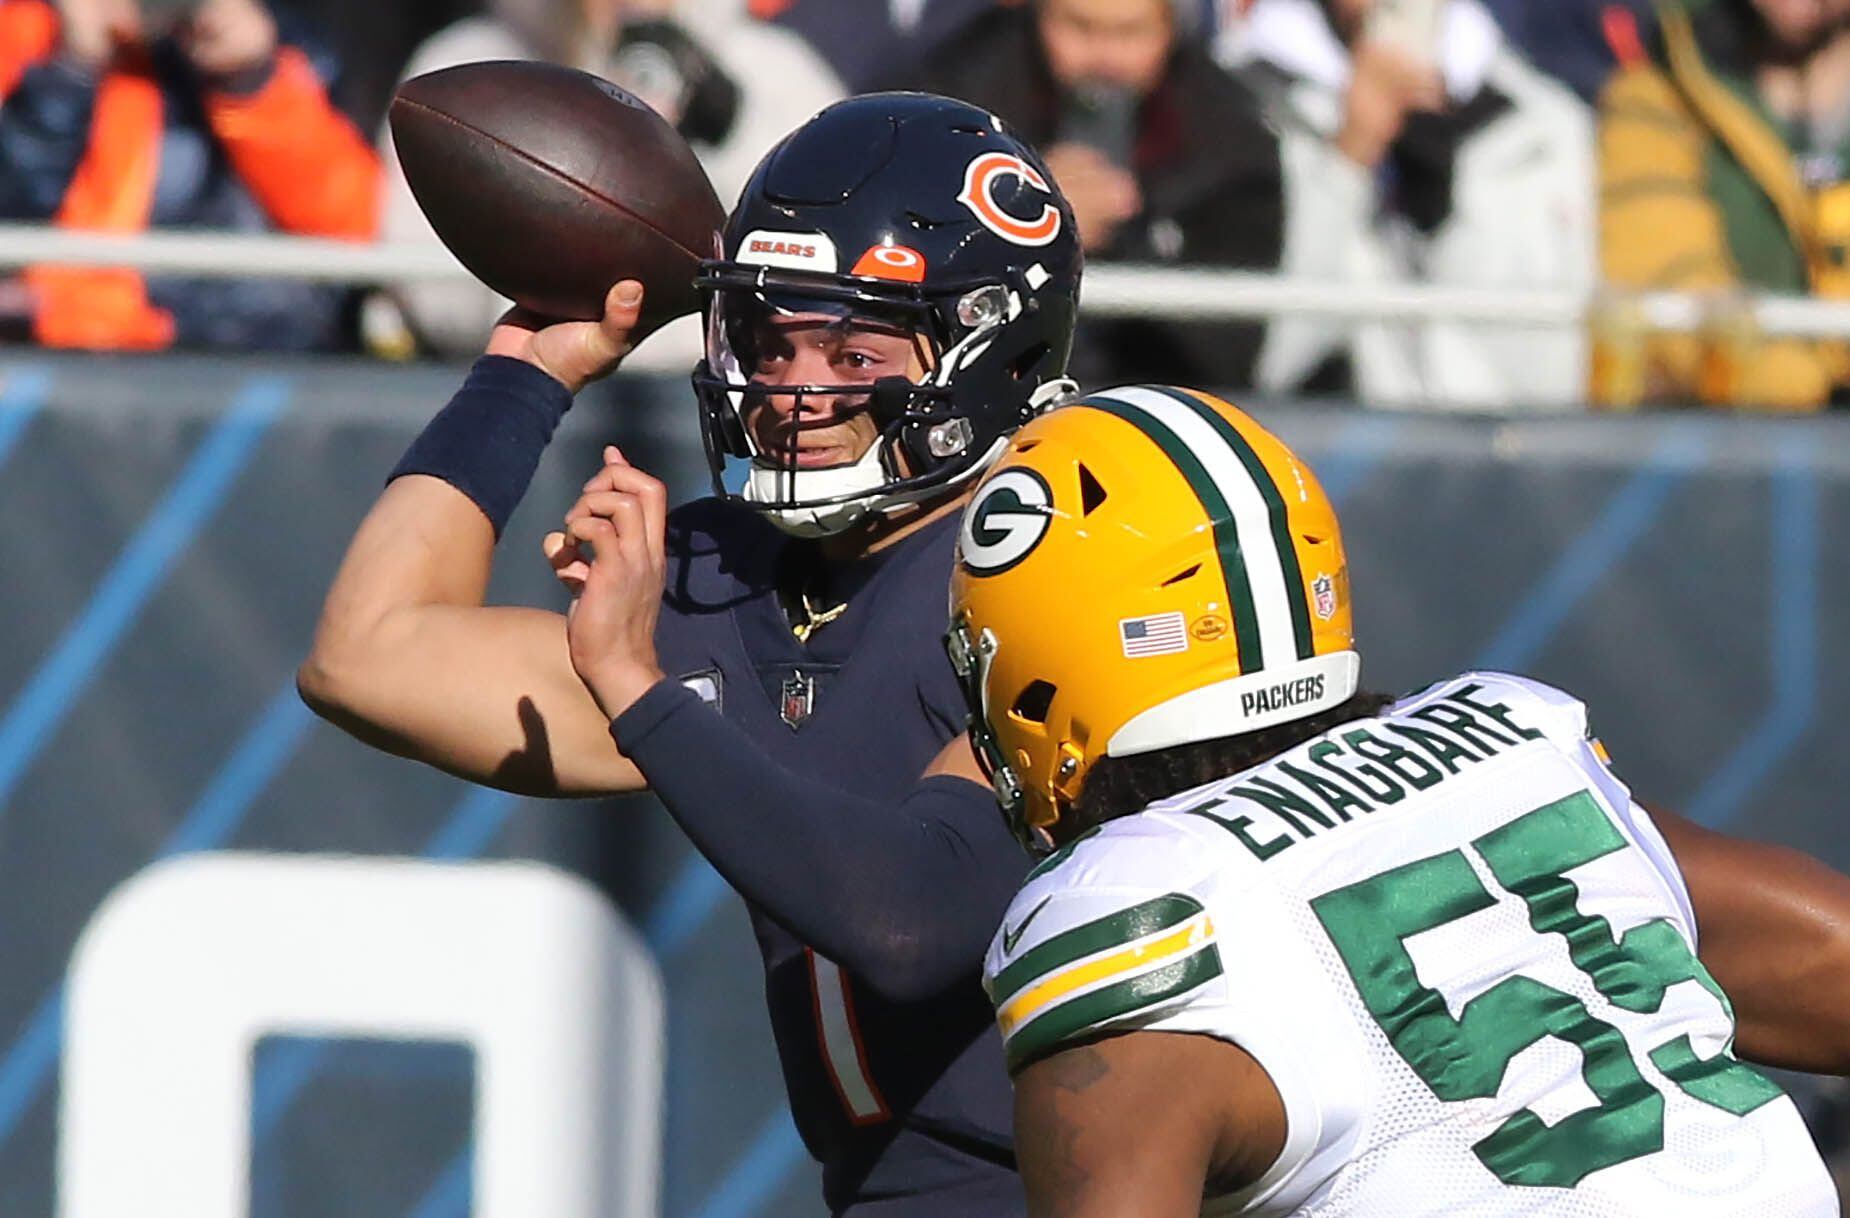 How Chicago beat reporter views Packers vs Bears Week 1 NFL game